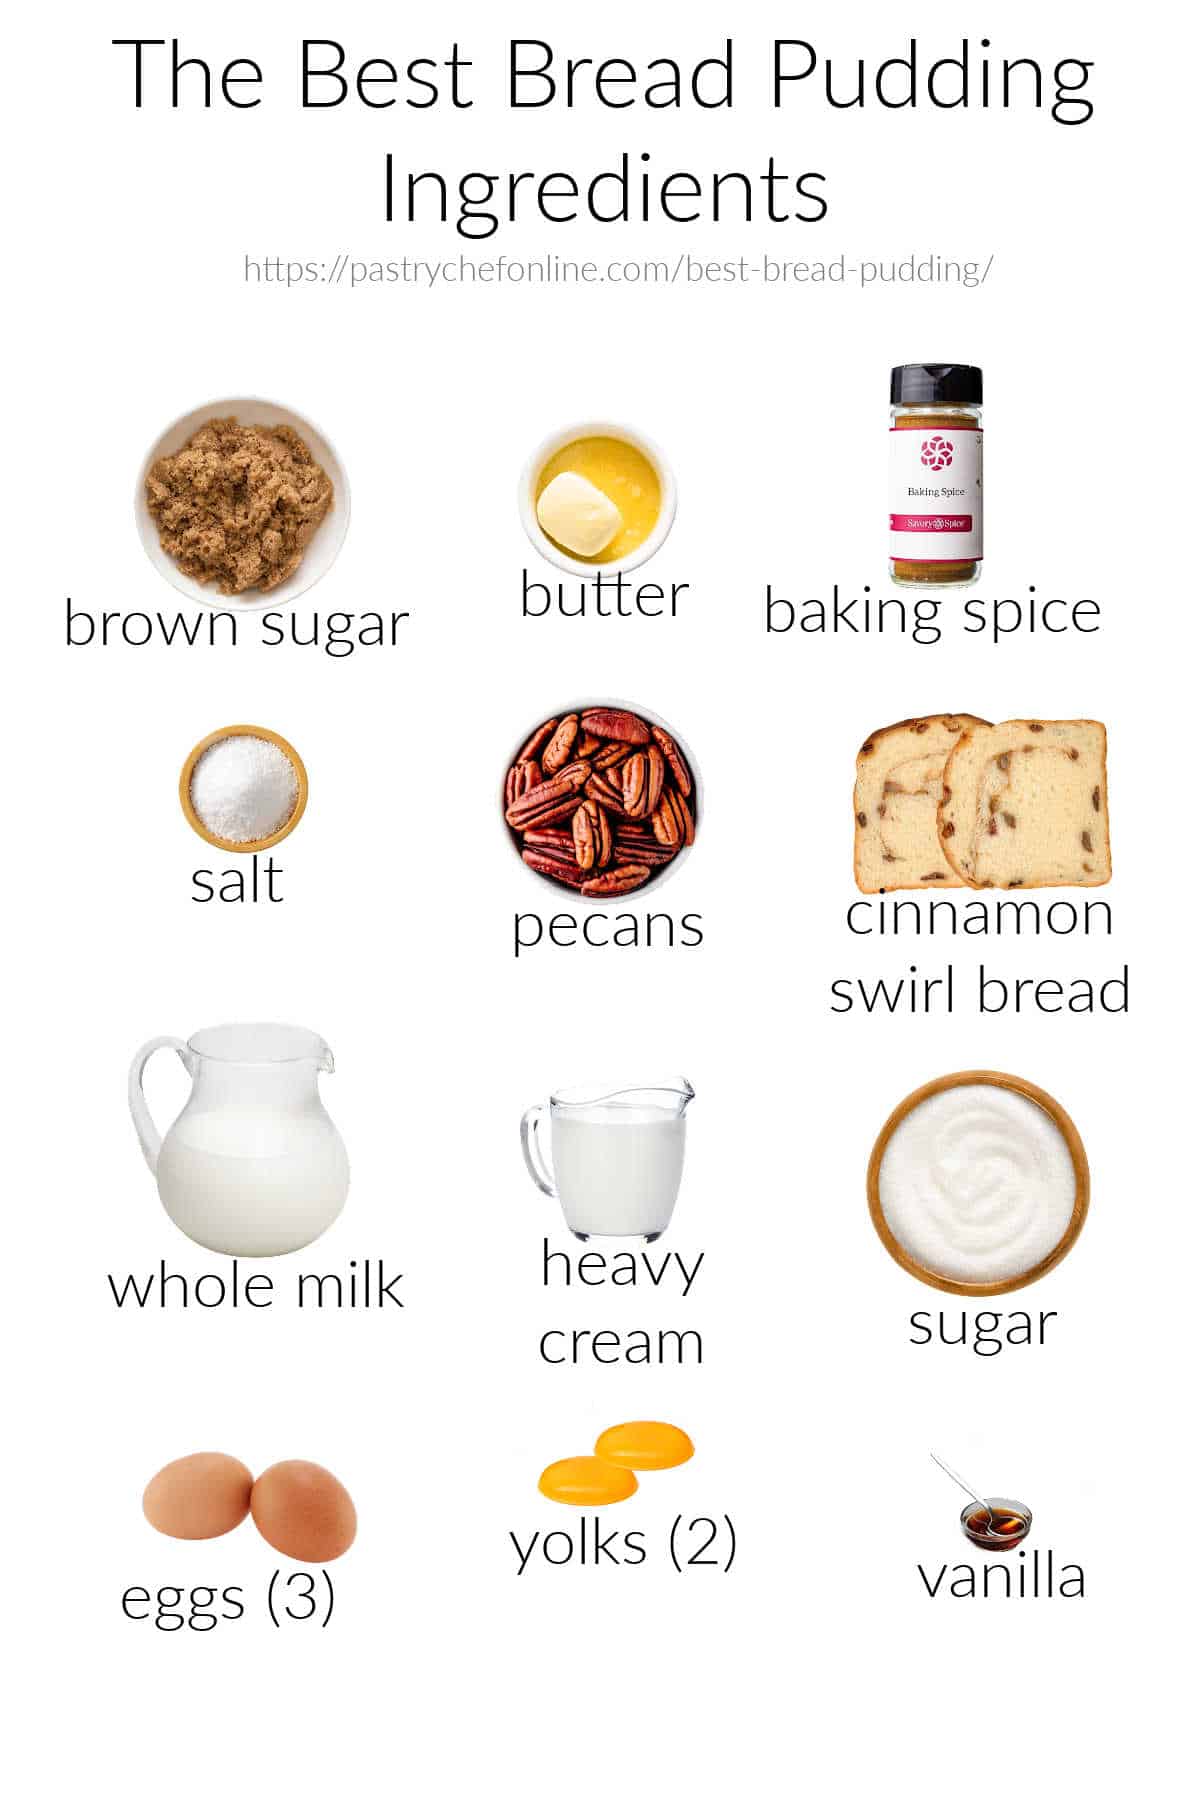 A collage of all the ingredients needed to make the best bread pudding, lebeled and shot on a white background.